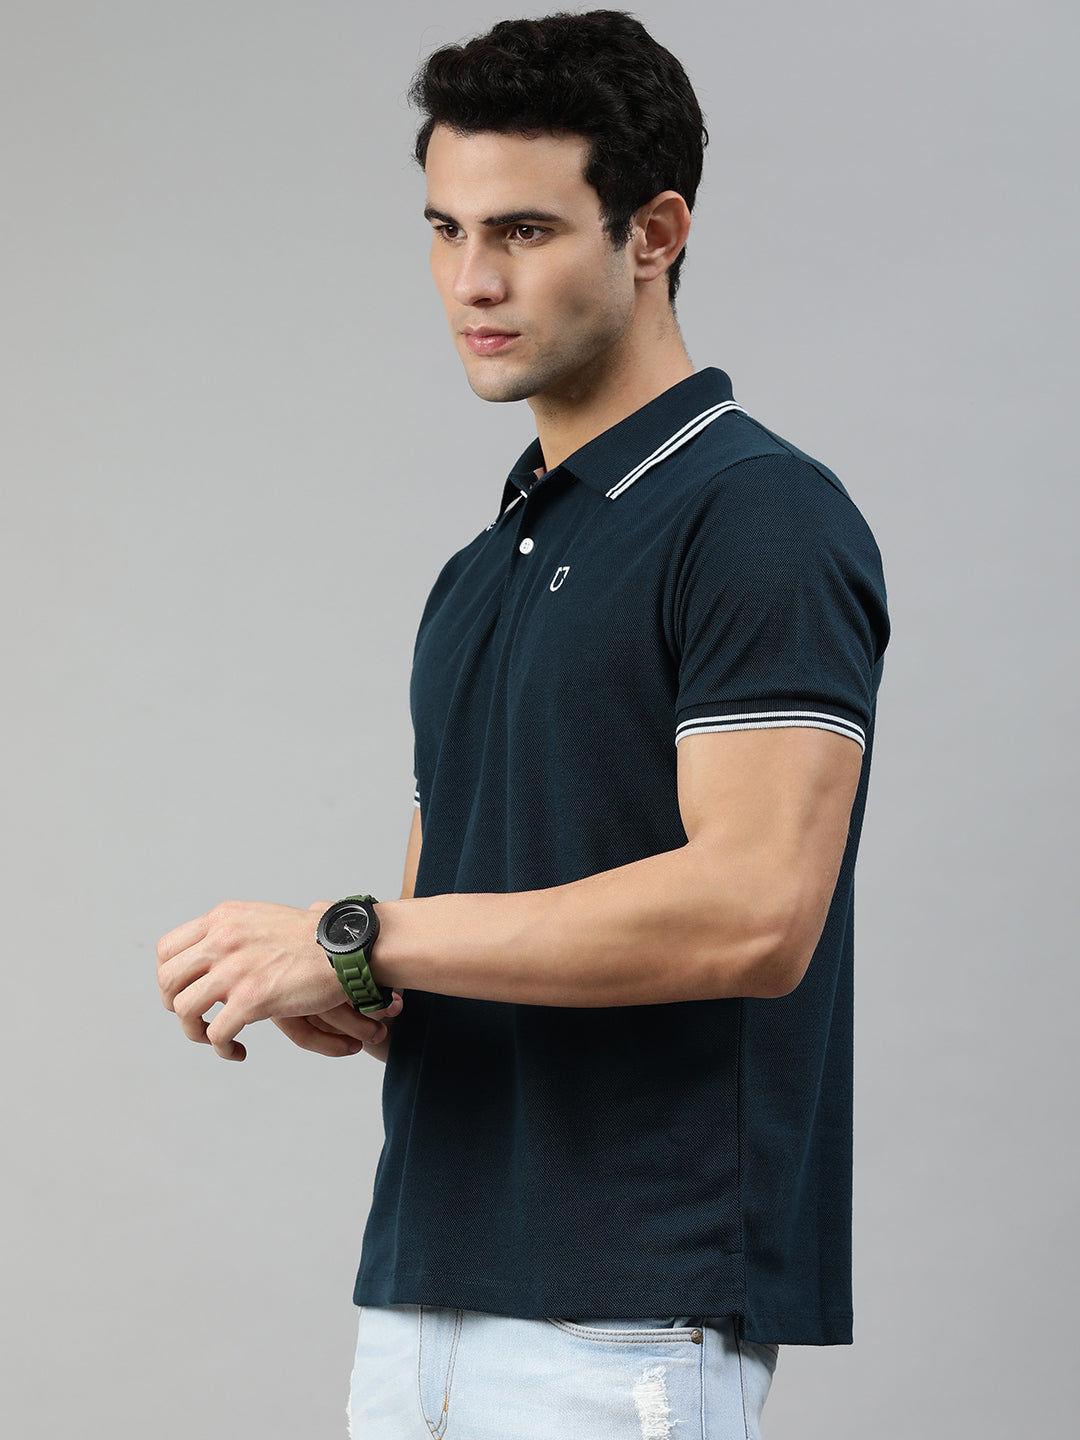 Men's Airforce Blue Solid Slim Fit Half Sleeve Cotton Polo T-Shirt